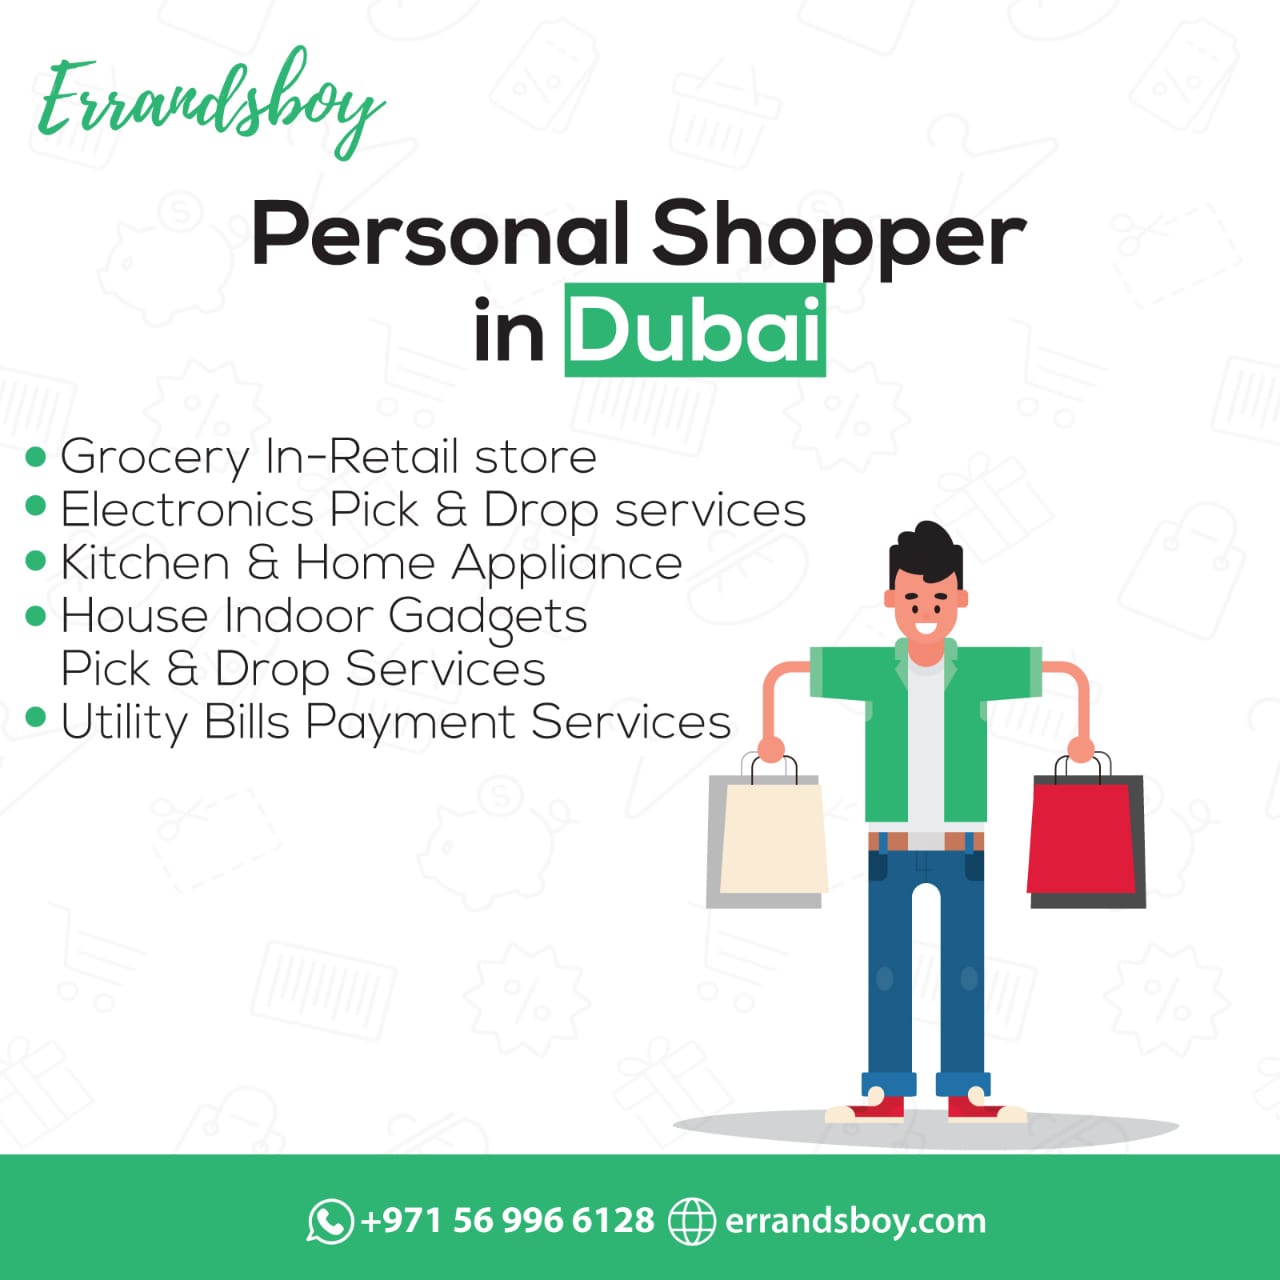 How can my Dedicated Personal Shopper Help Me?